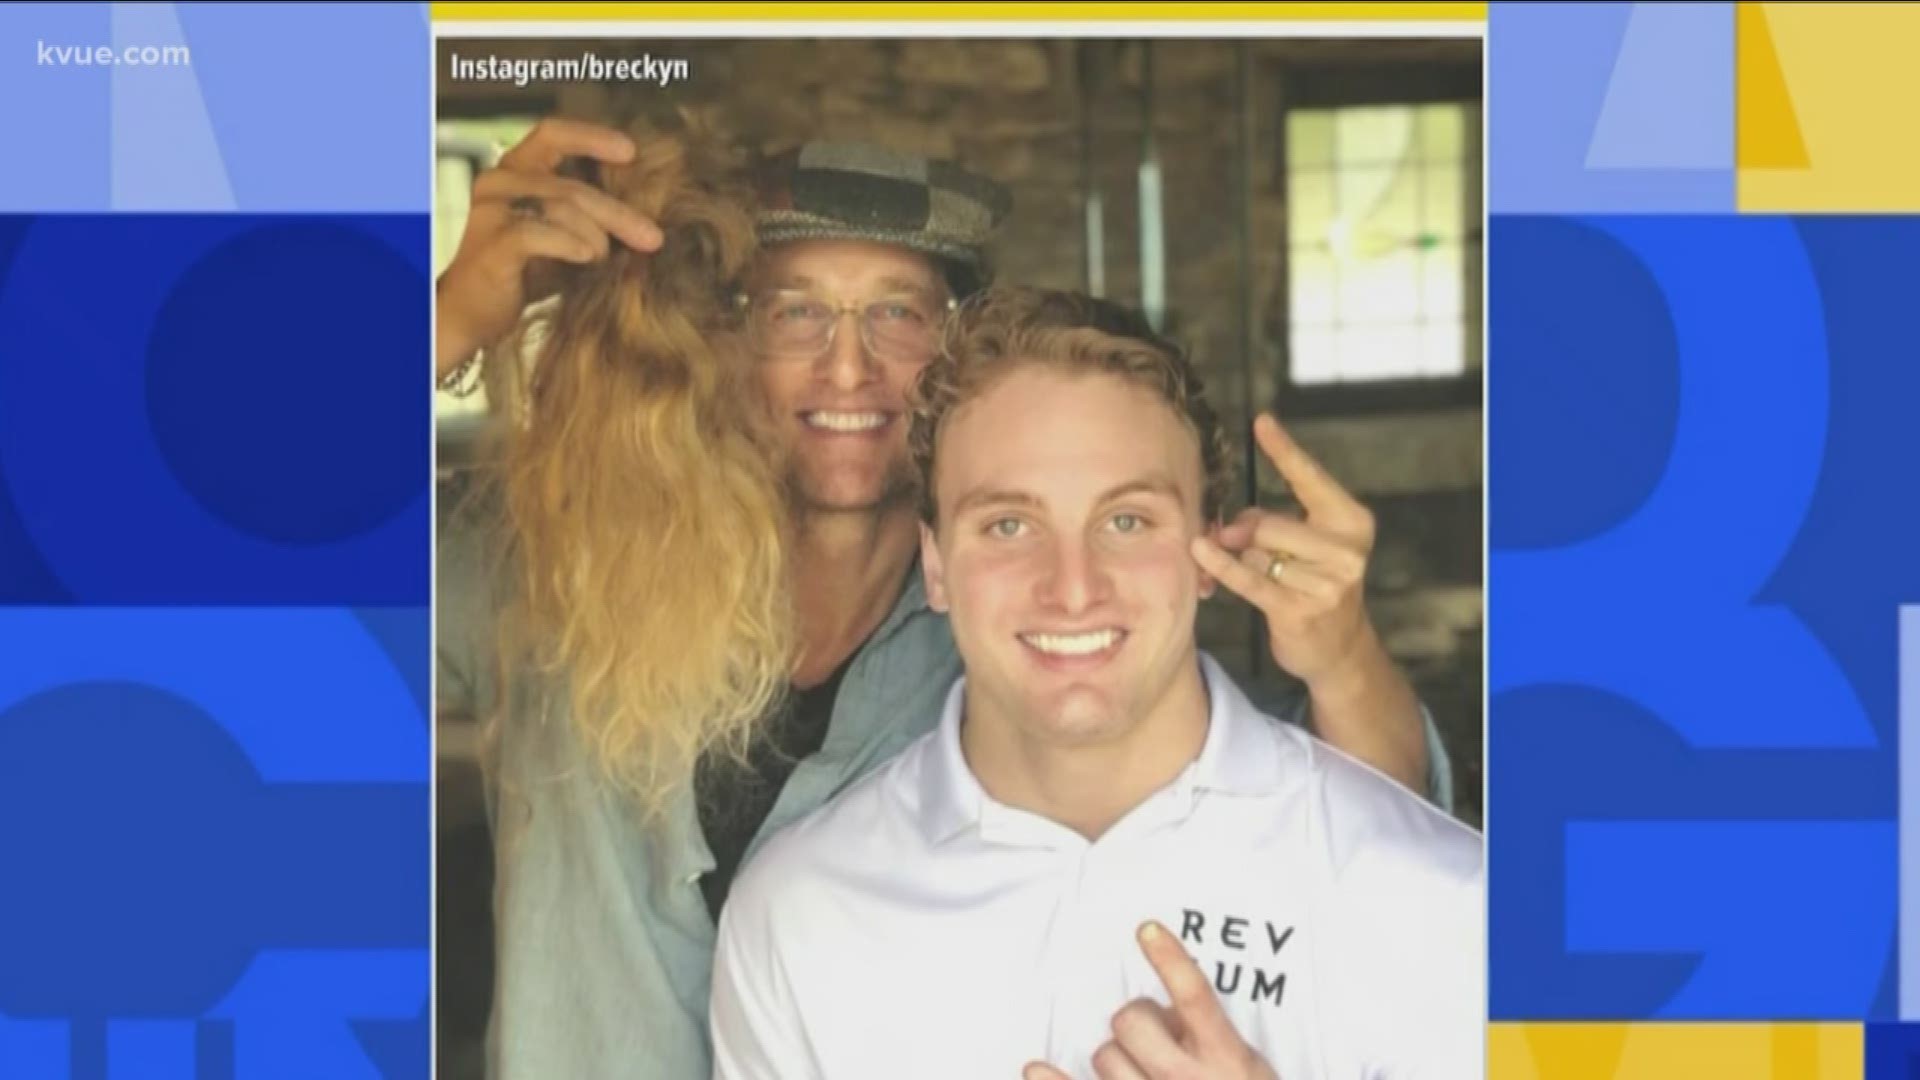 Austin's own Matthew McConaughey has a new movie coming out. As he was on GMA to promote his film, he also talked about the now-famous haircut he gave earlier this month.